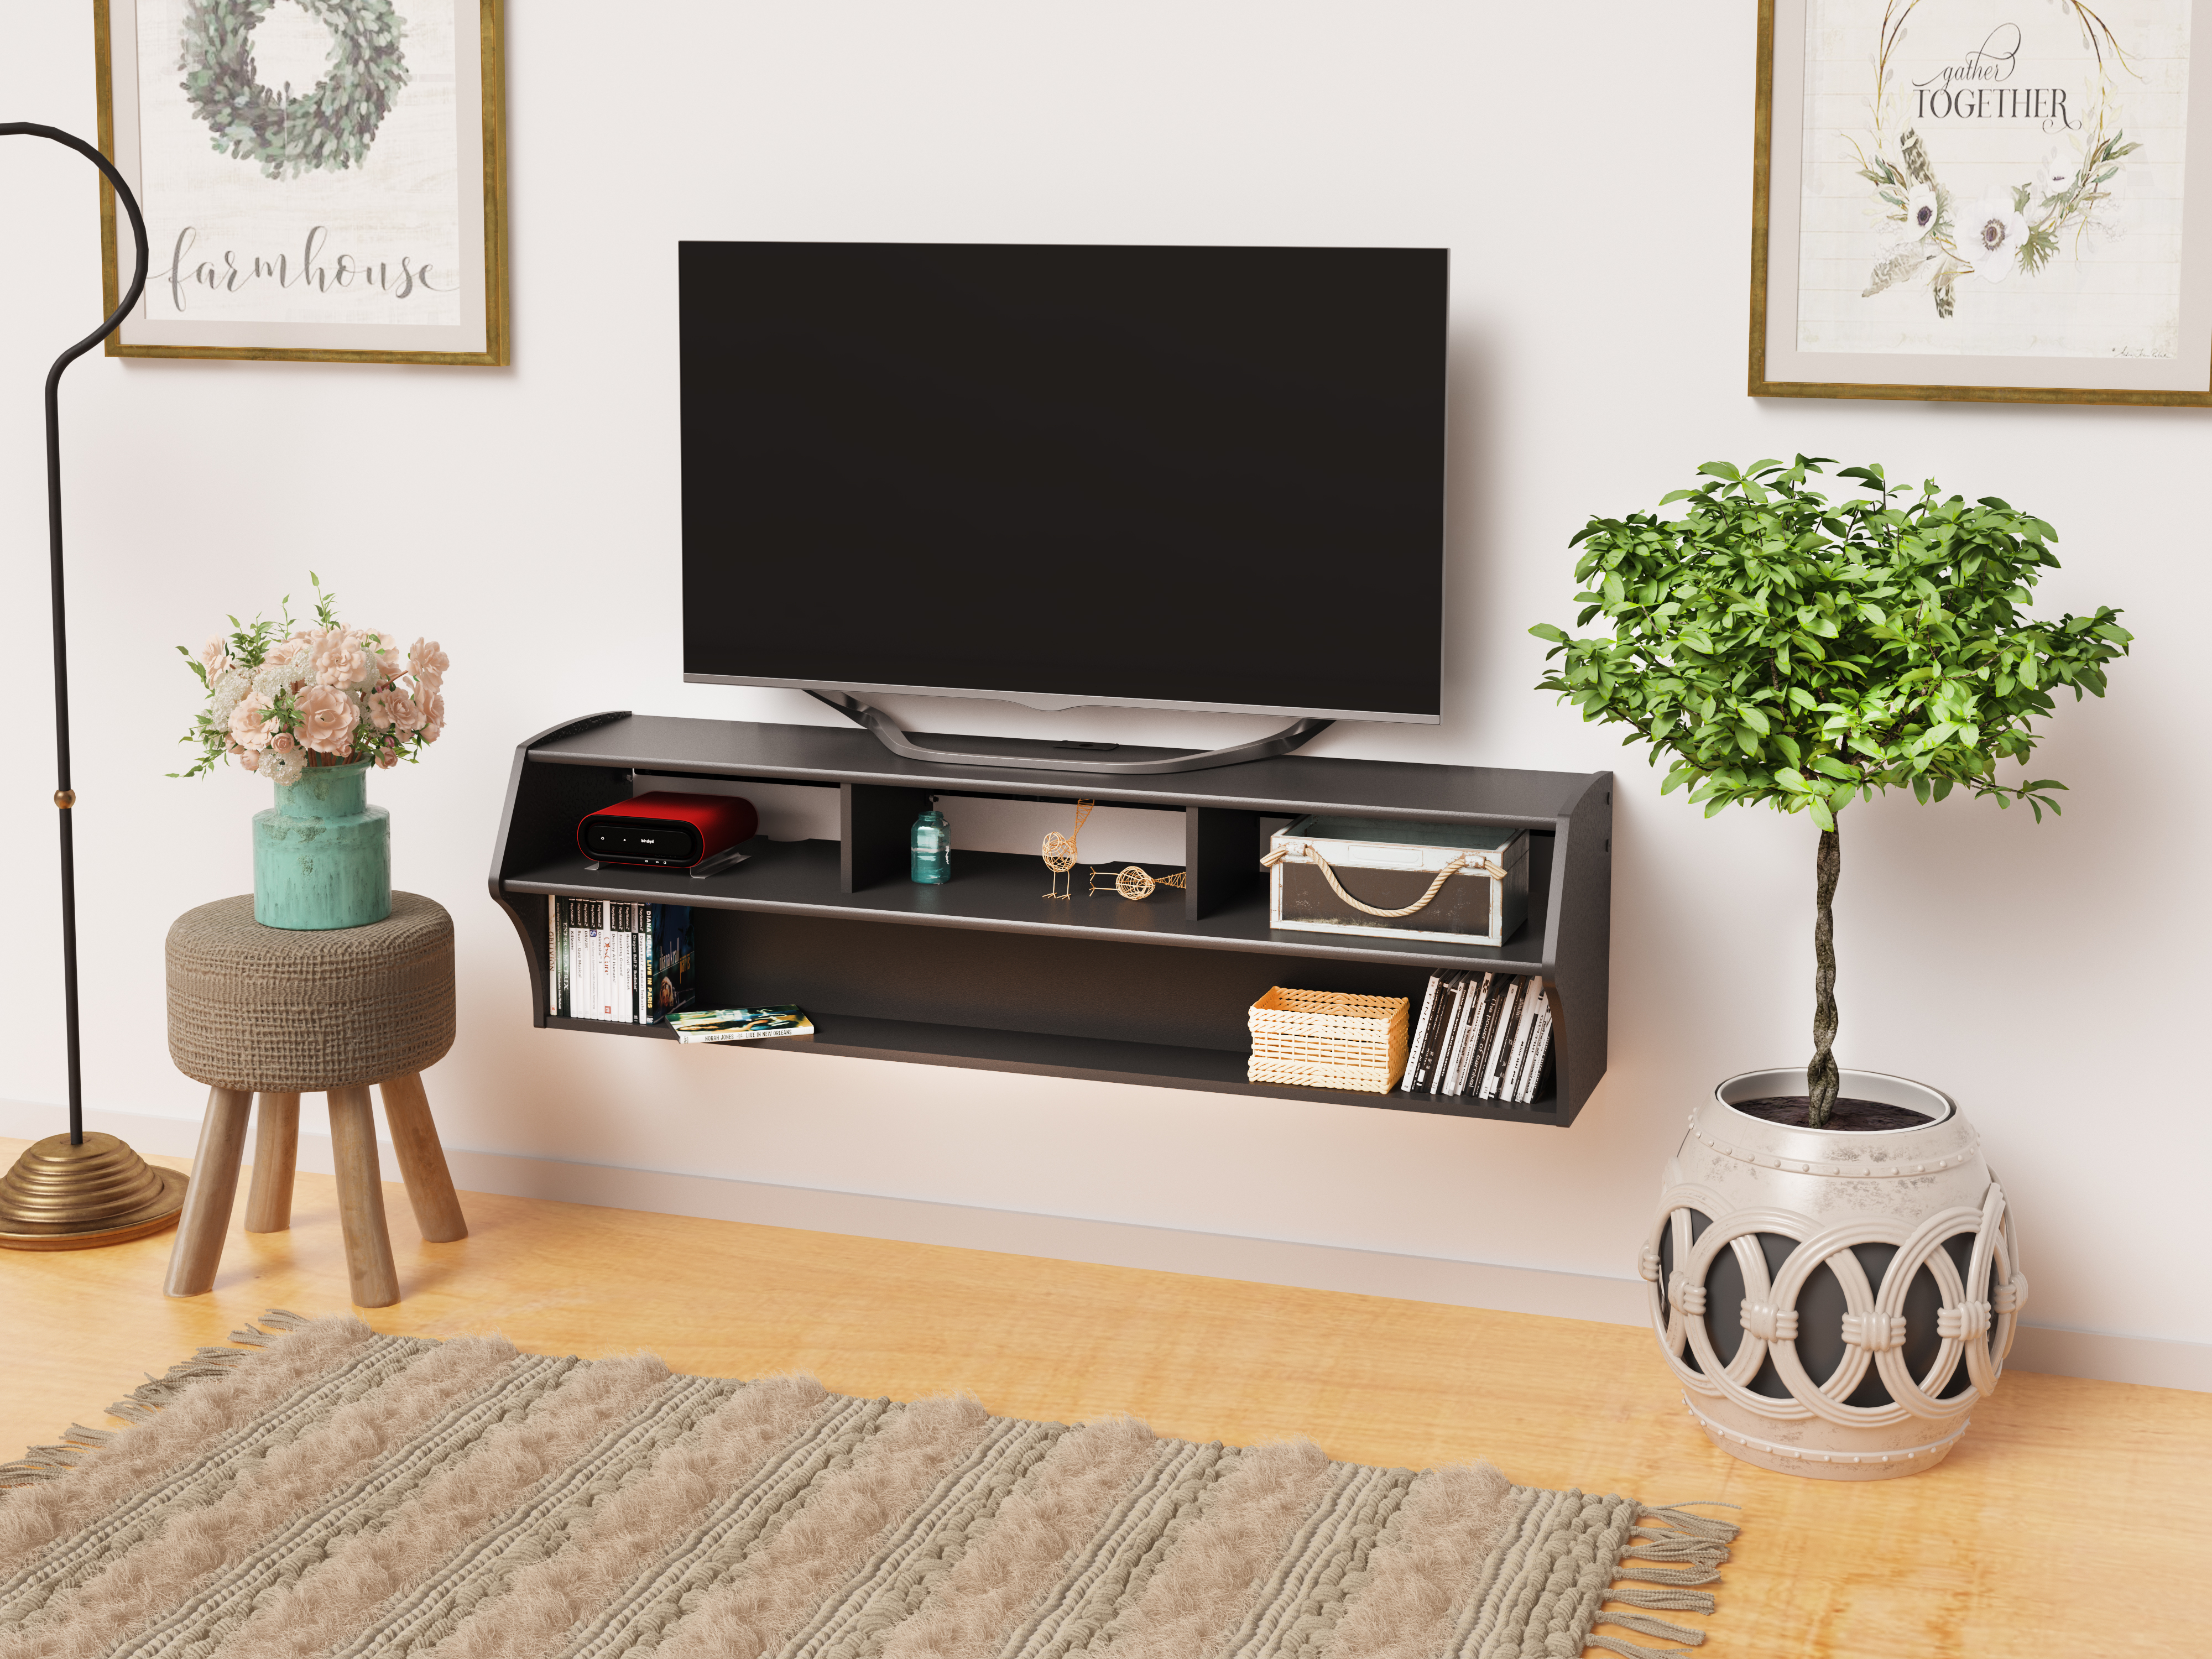 Altus Plus Floating TV Stand for TVs up to 60" - image 2 of 10